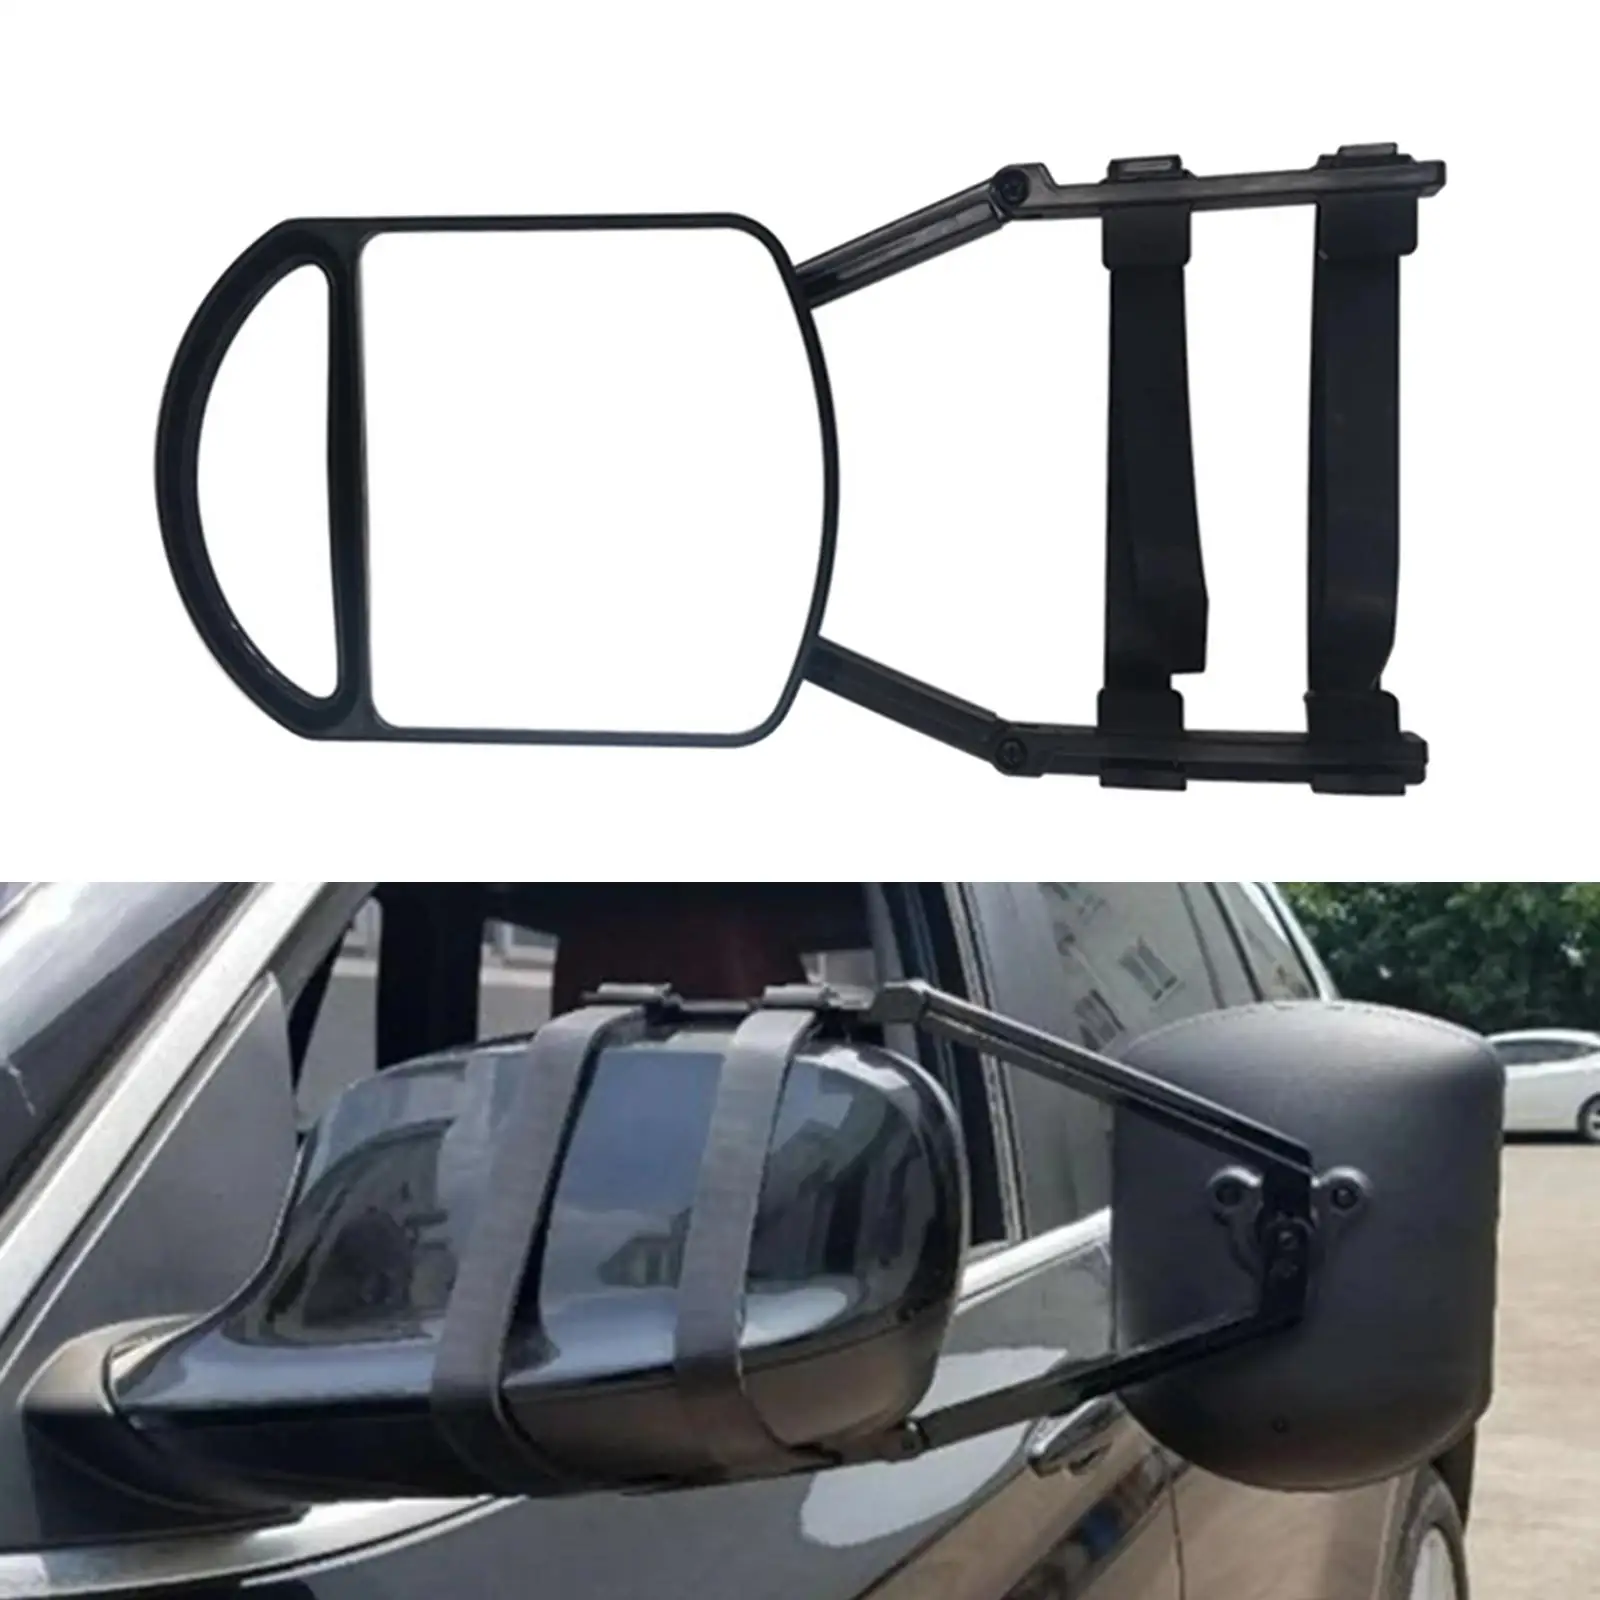 Clamp On Towing Mirror Extendable Fit for Truck SUV Van Trailer